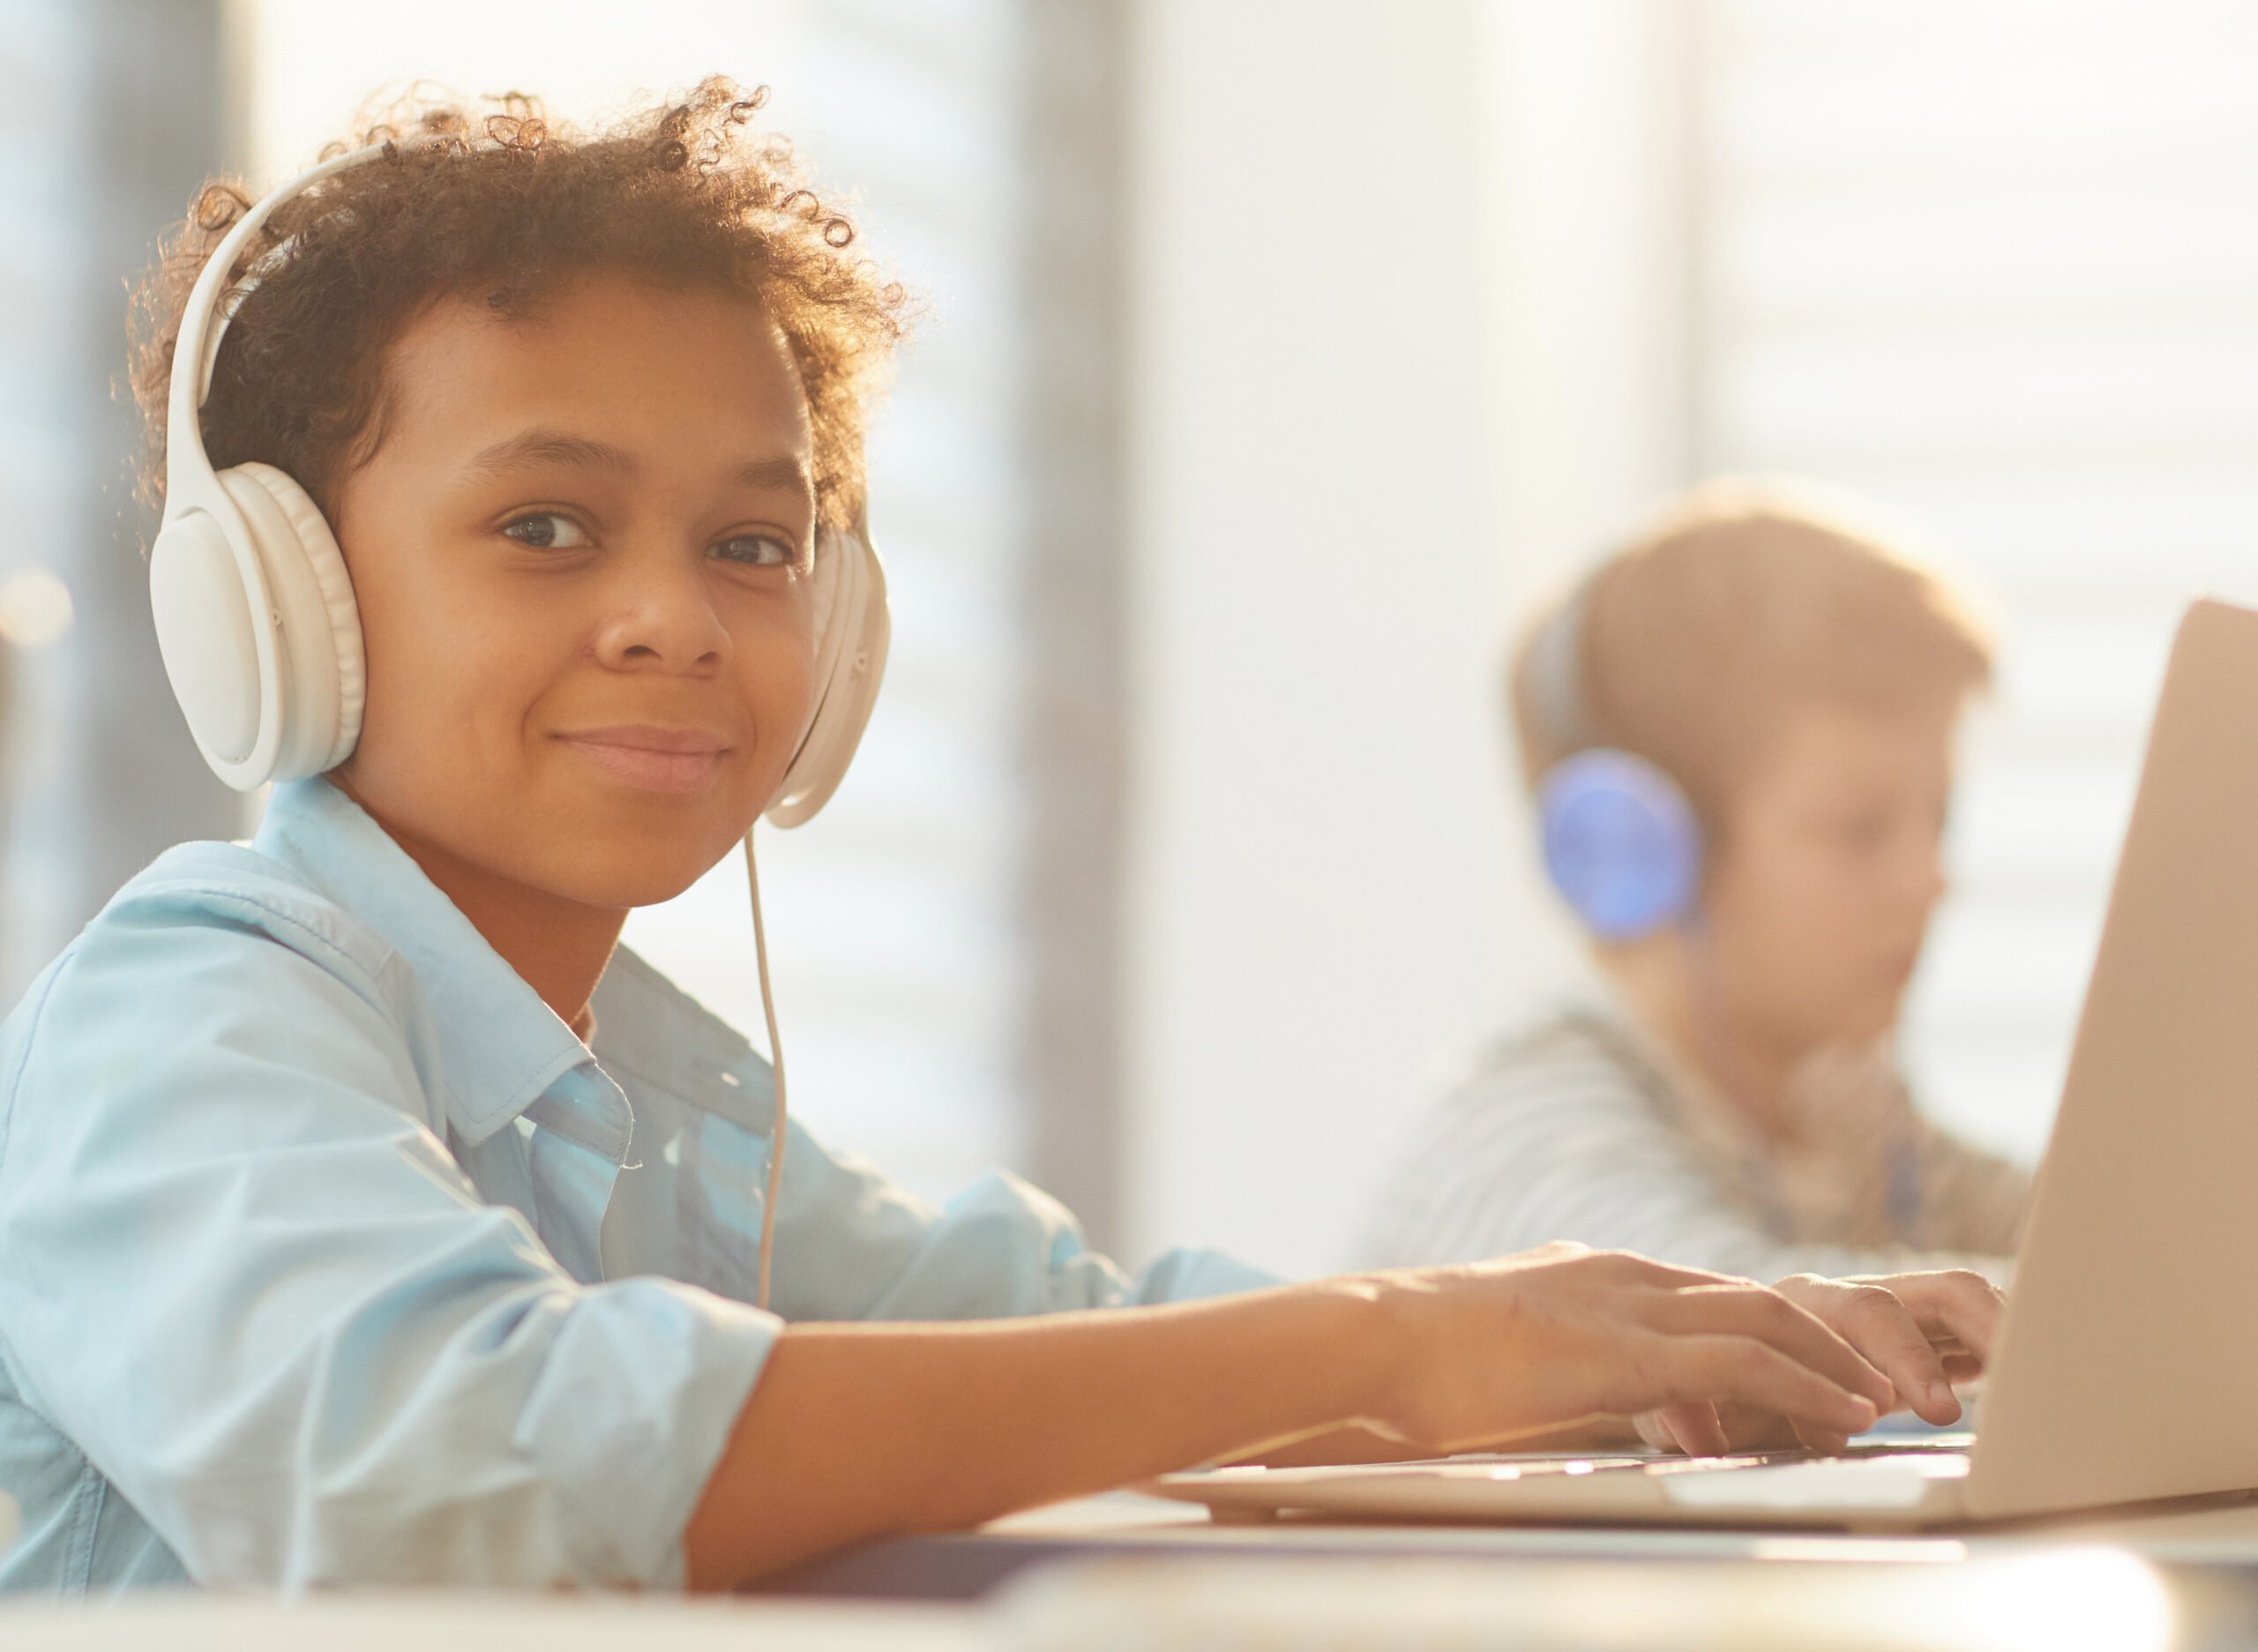 Medium portrait of African American boy wearing headphones using laptop while studying at school, copy space